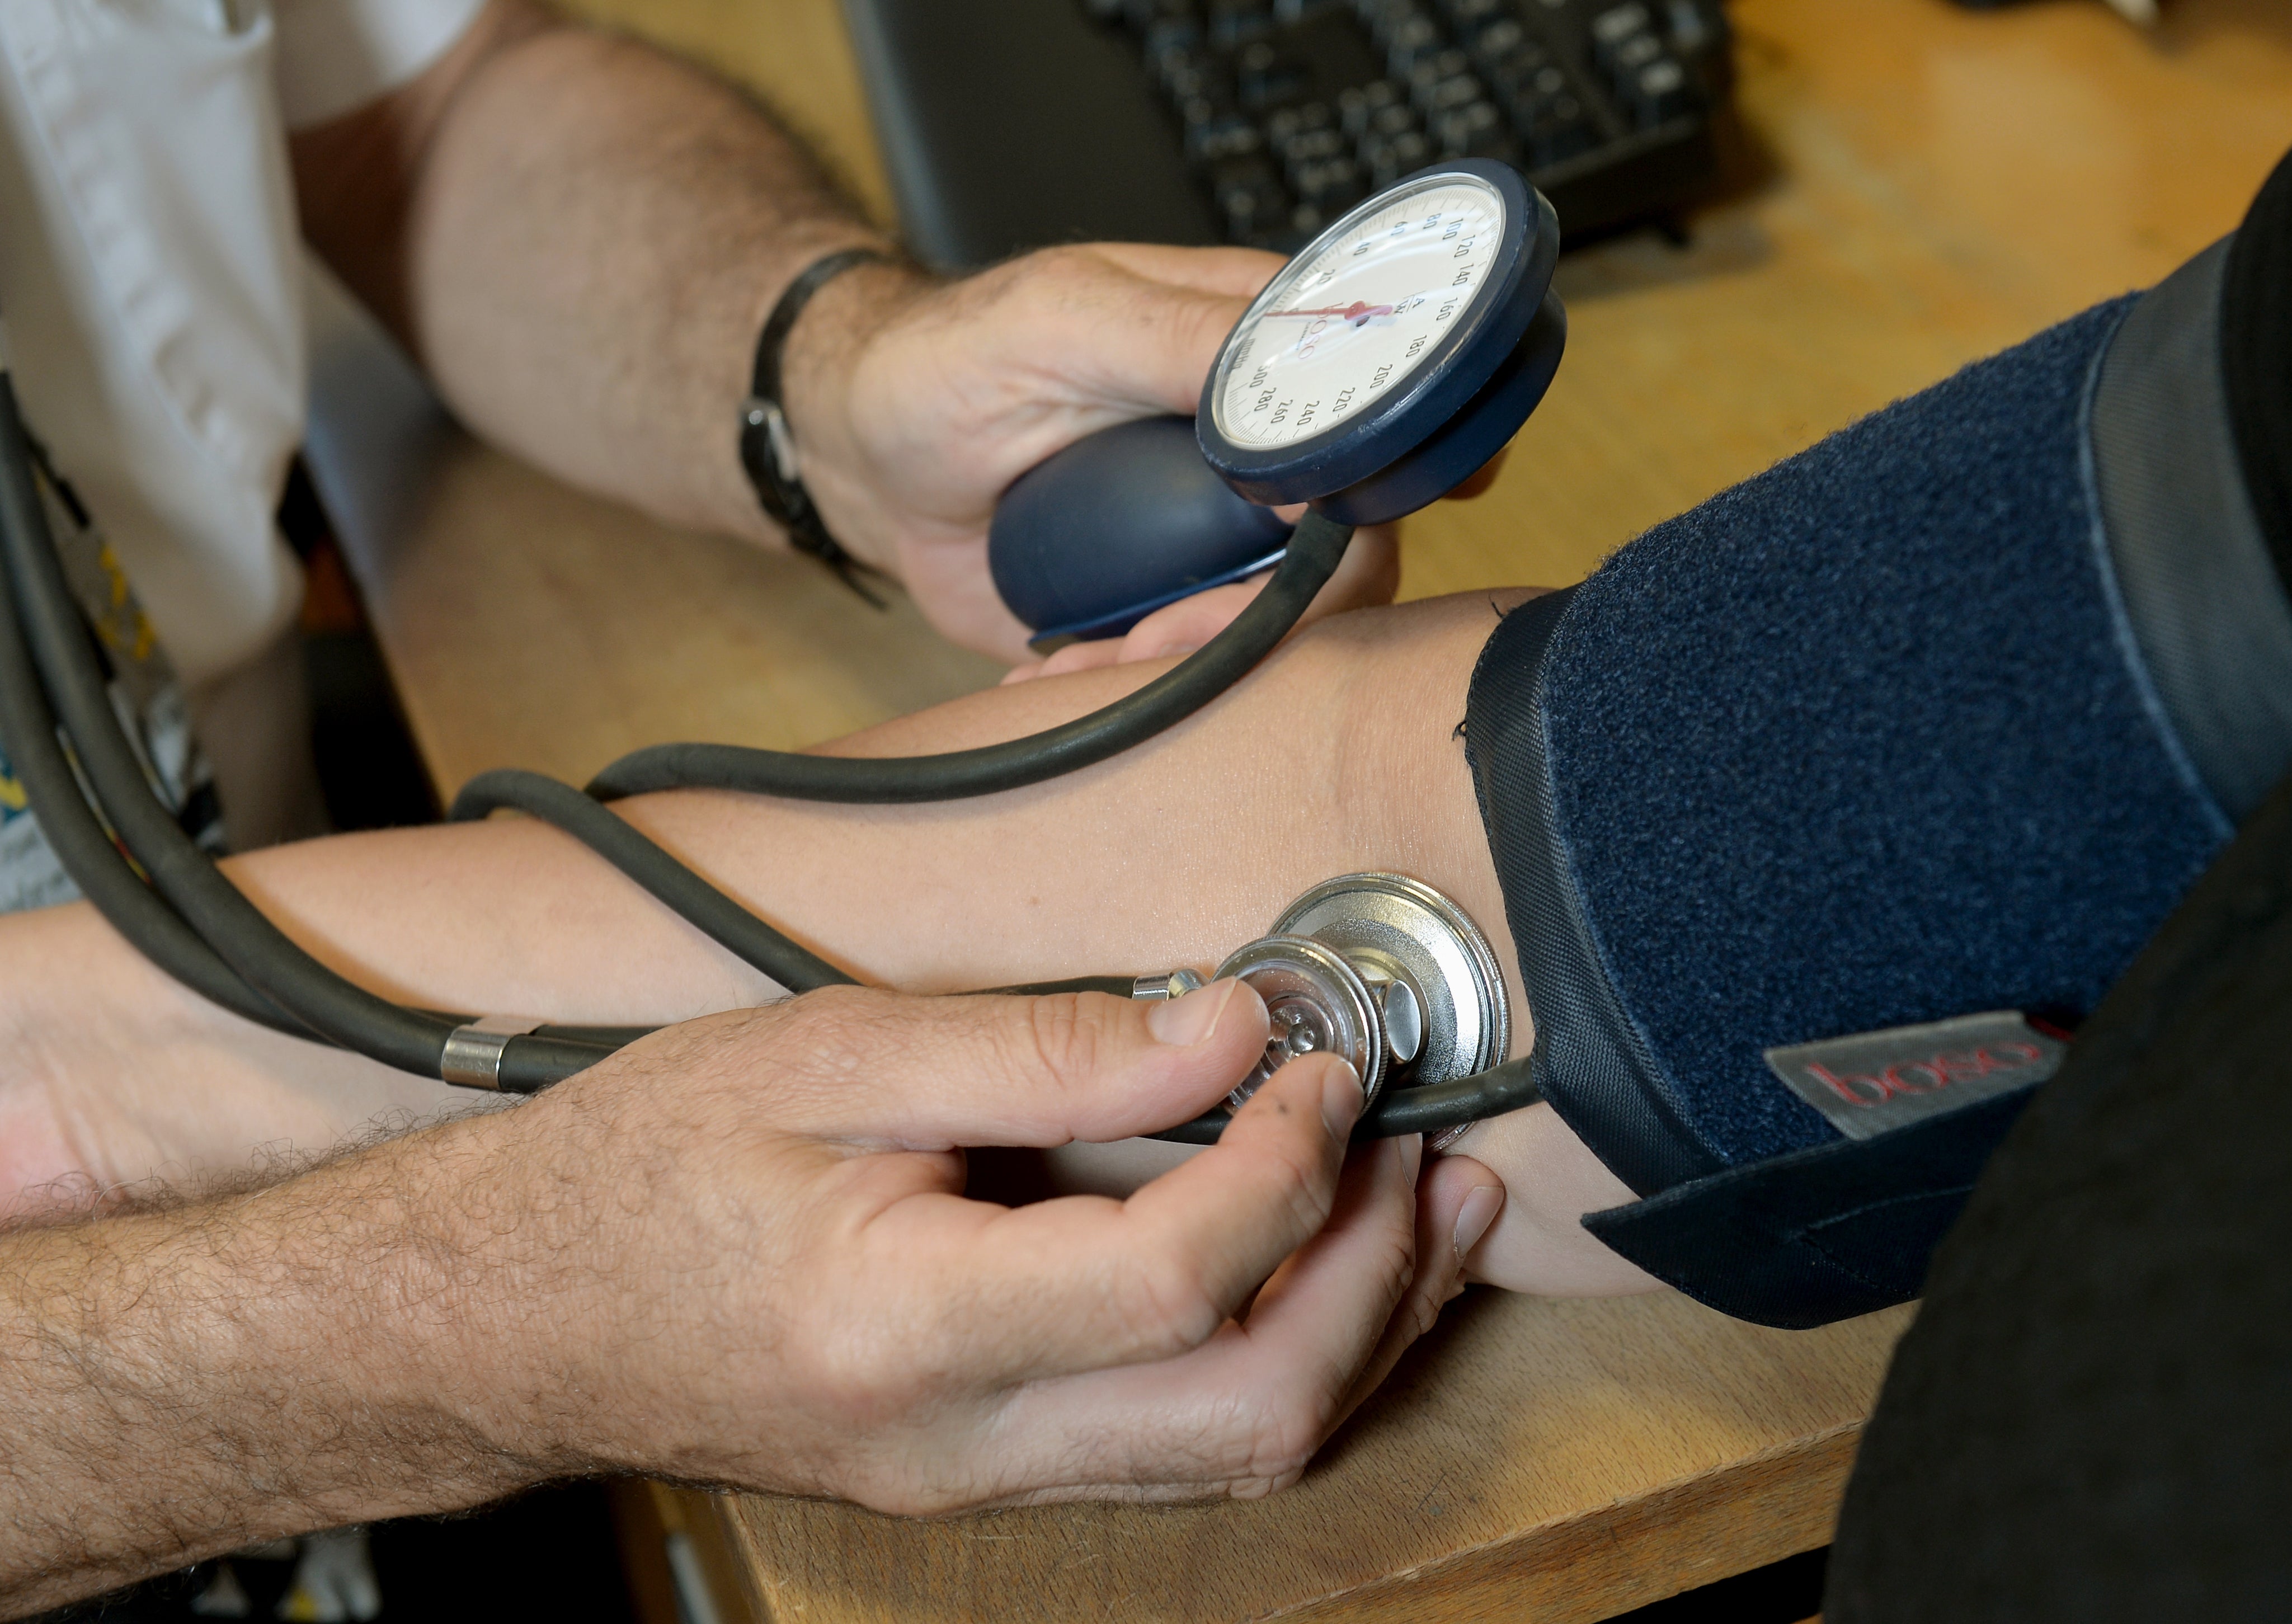 A doctor checking a patient’s blood pressure, as over half of UK adults cannot name a single symptom of blood cancer despite it being the third biggest cancer killer in the UK, polling for Blood Cancer UK suggests (Anthony Devlin/PA)